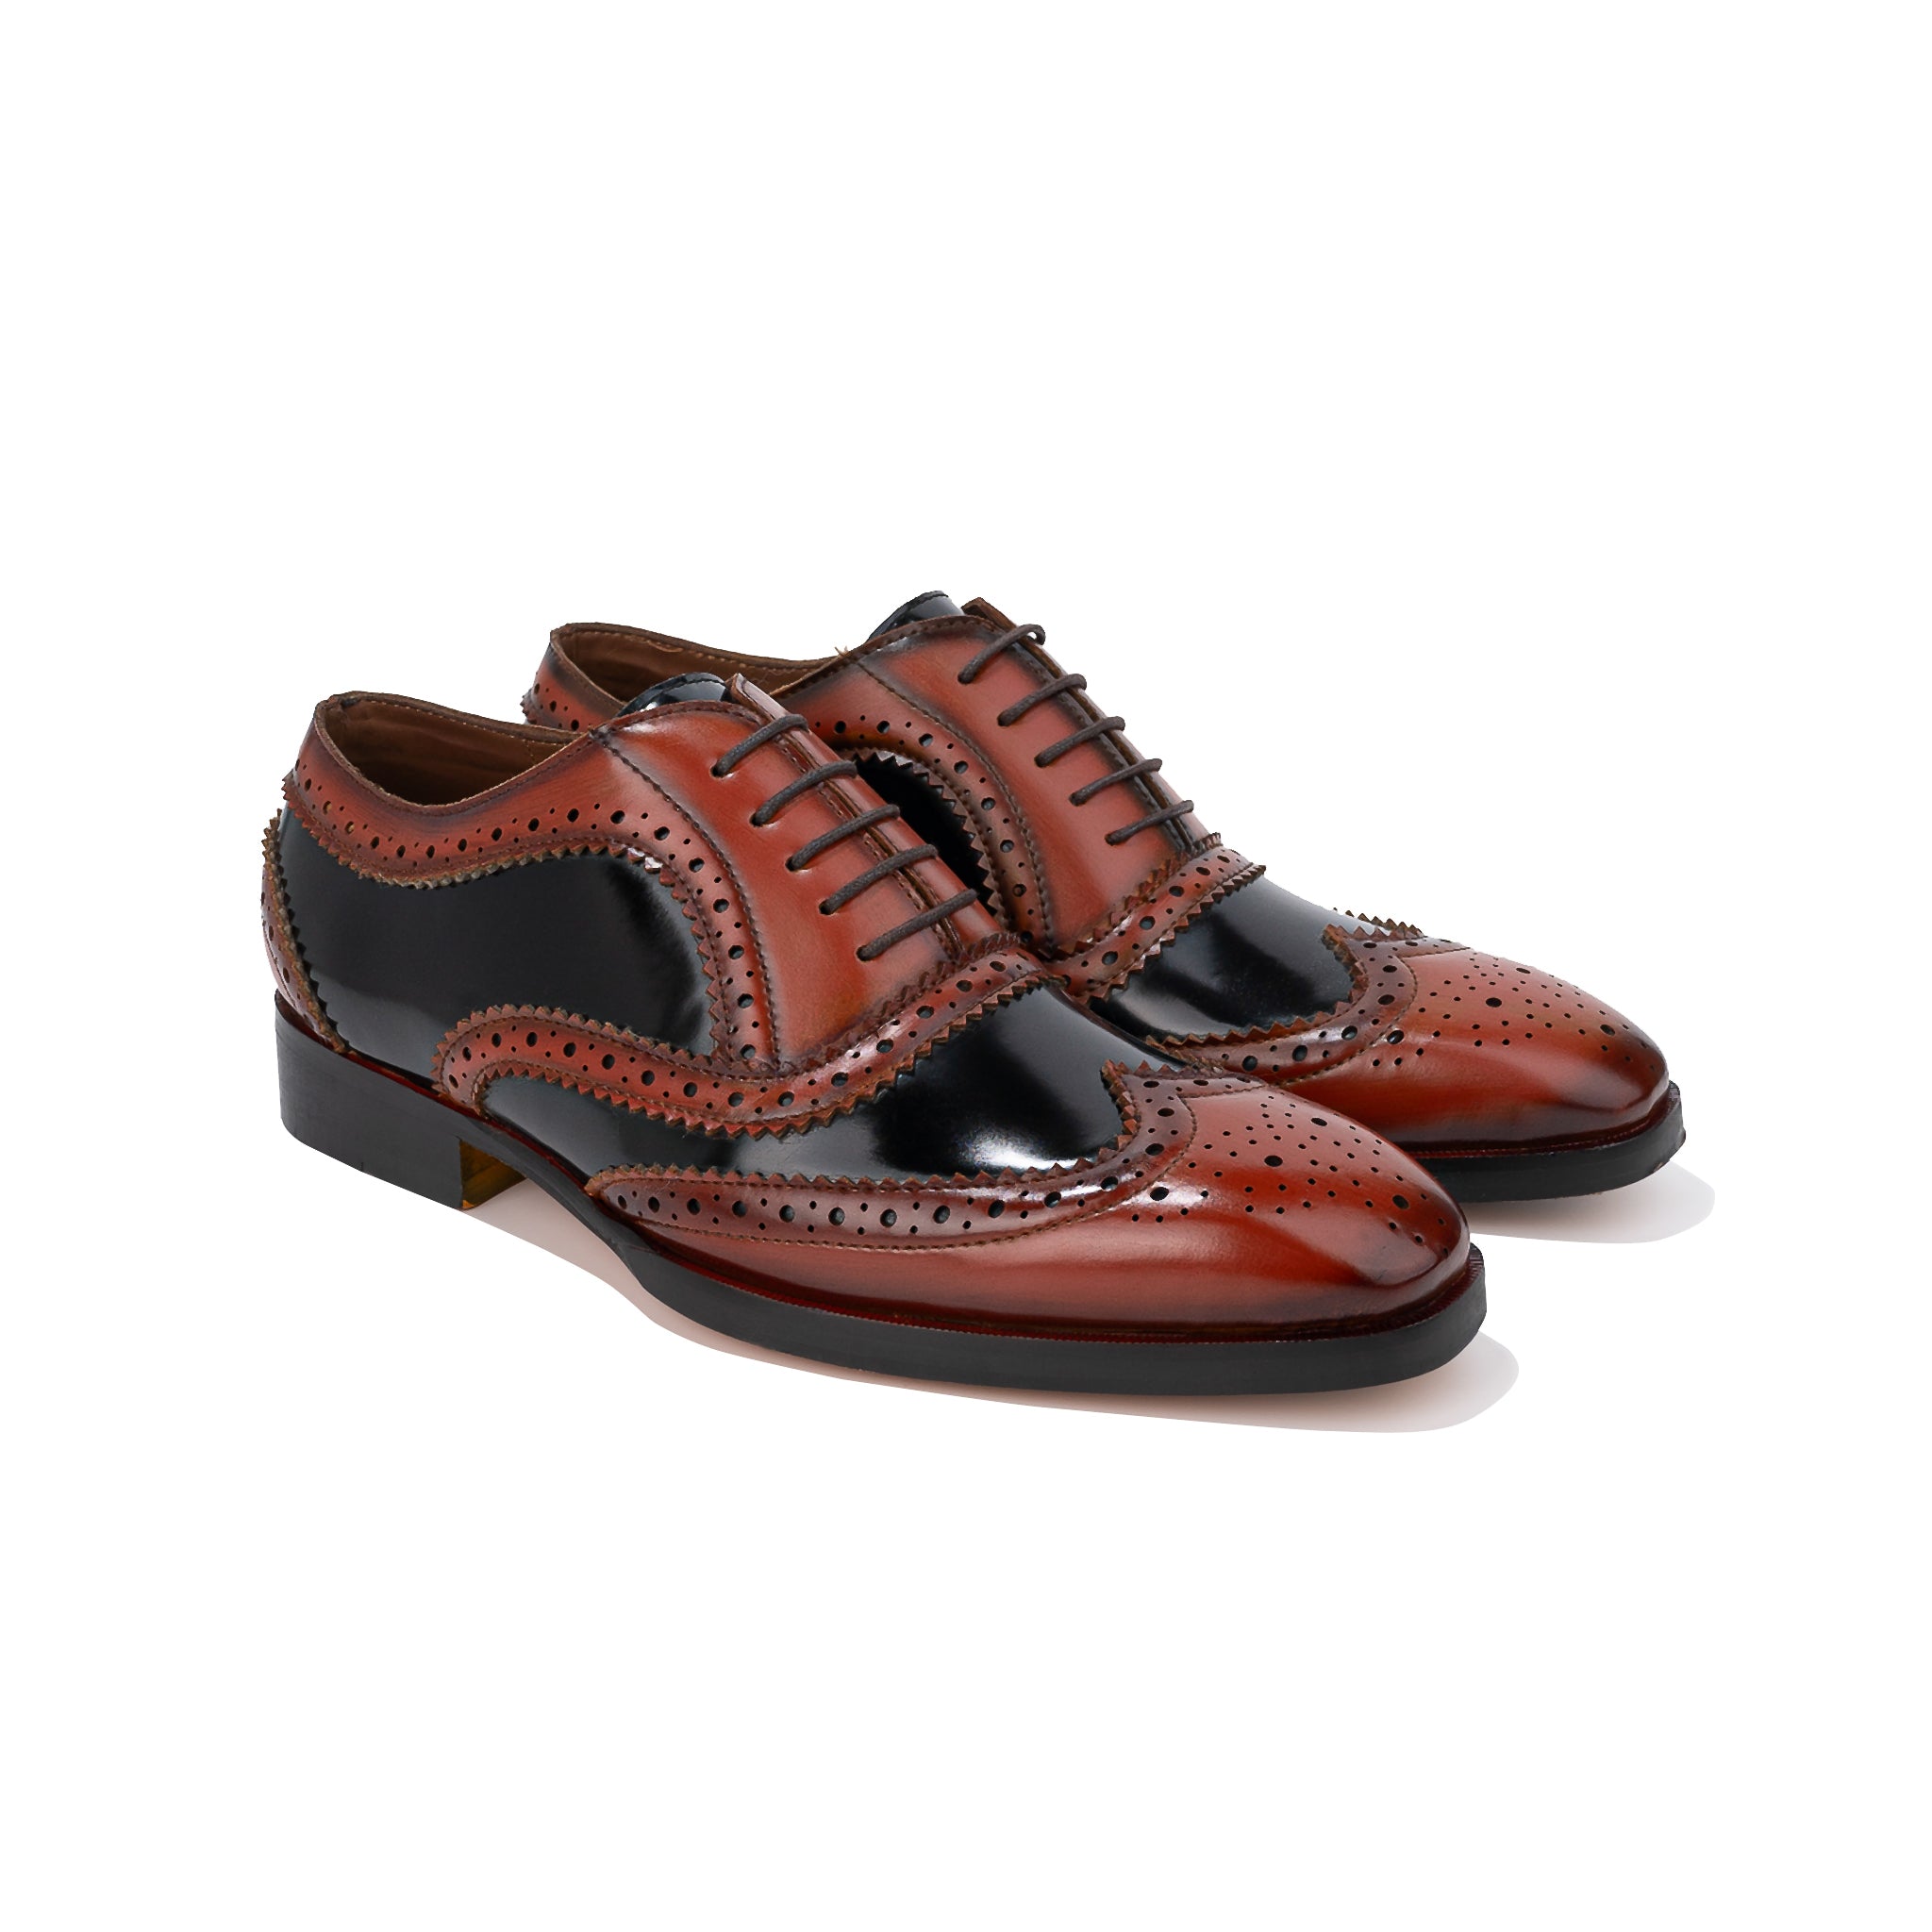 Mahogany Brogue Lace Up Leather Men's Shoes